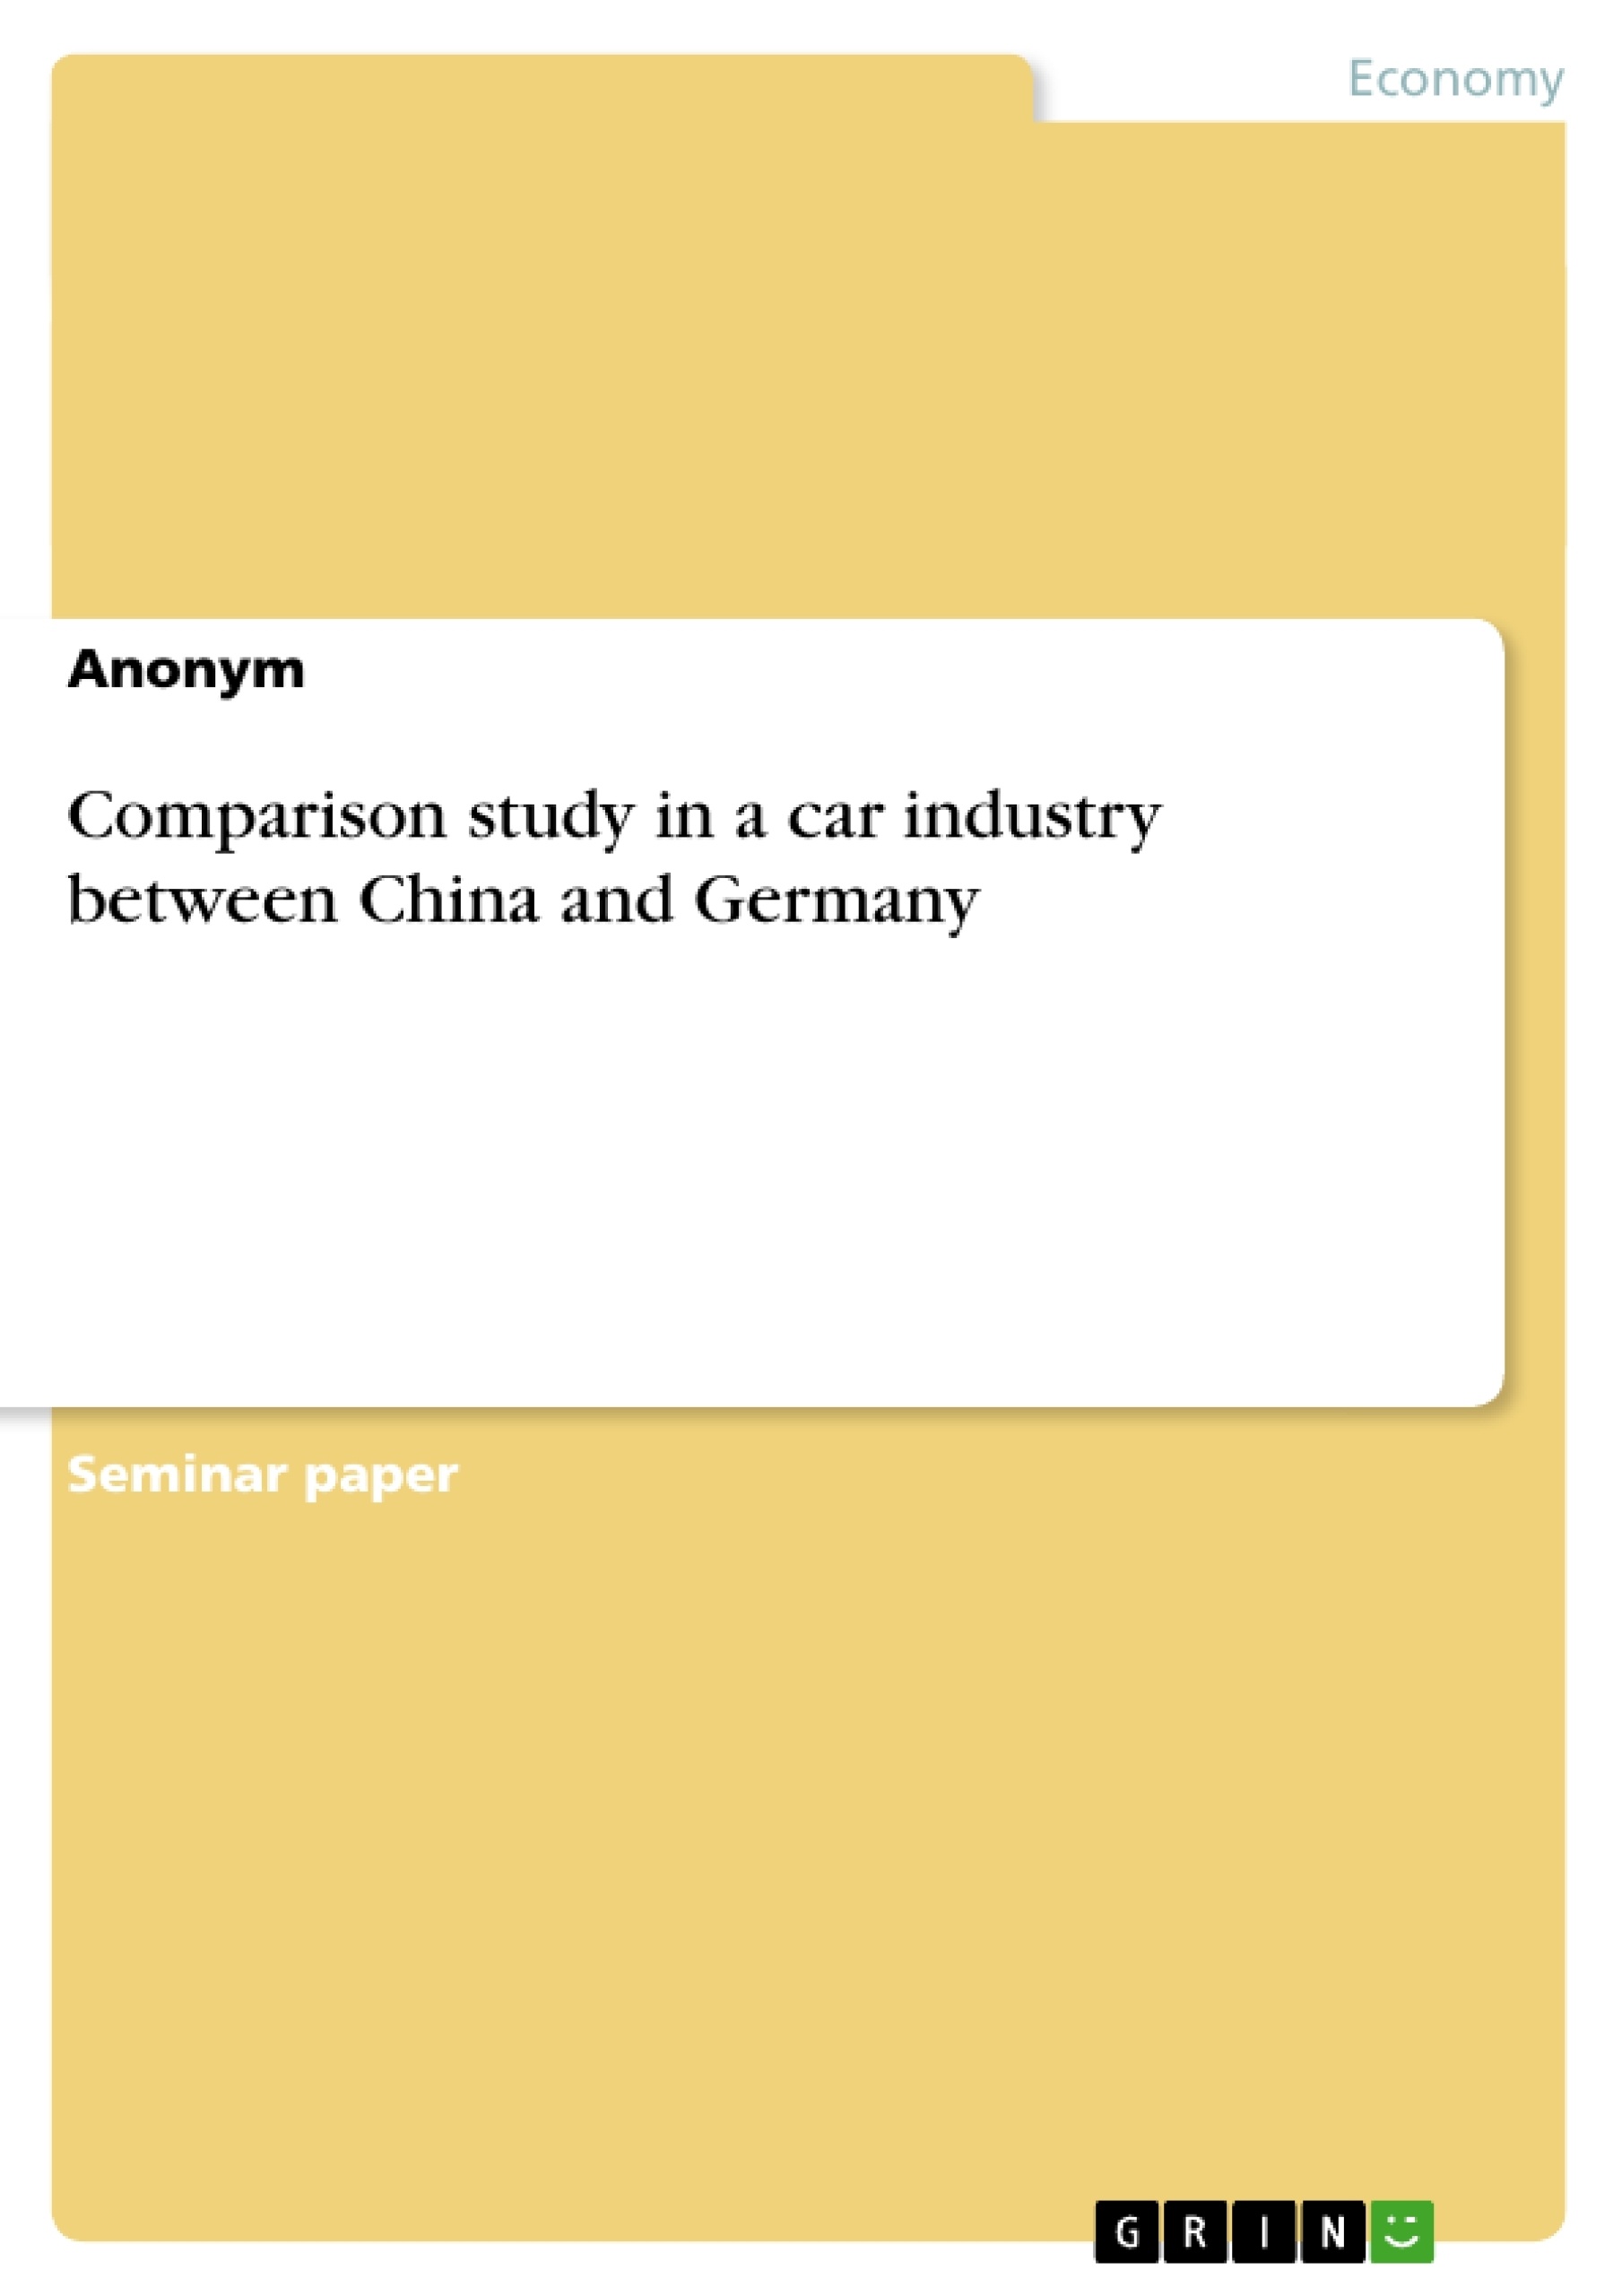 Title: Comparison study in a car industry between China and Germany